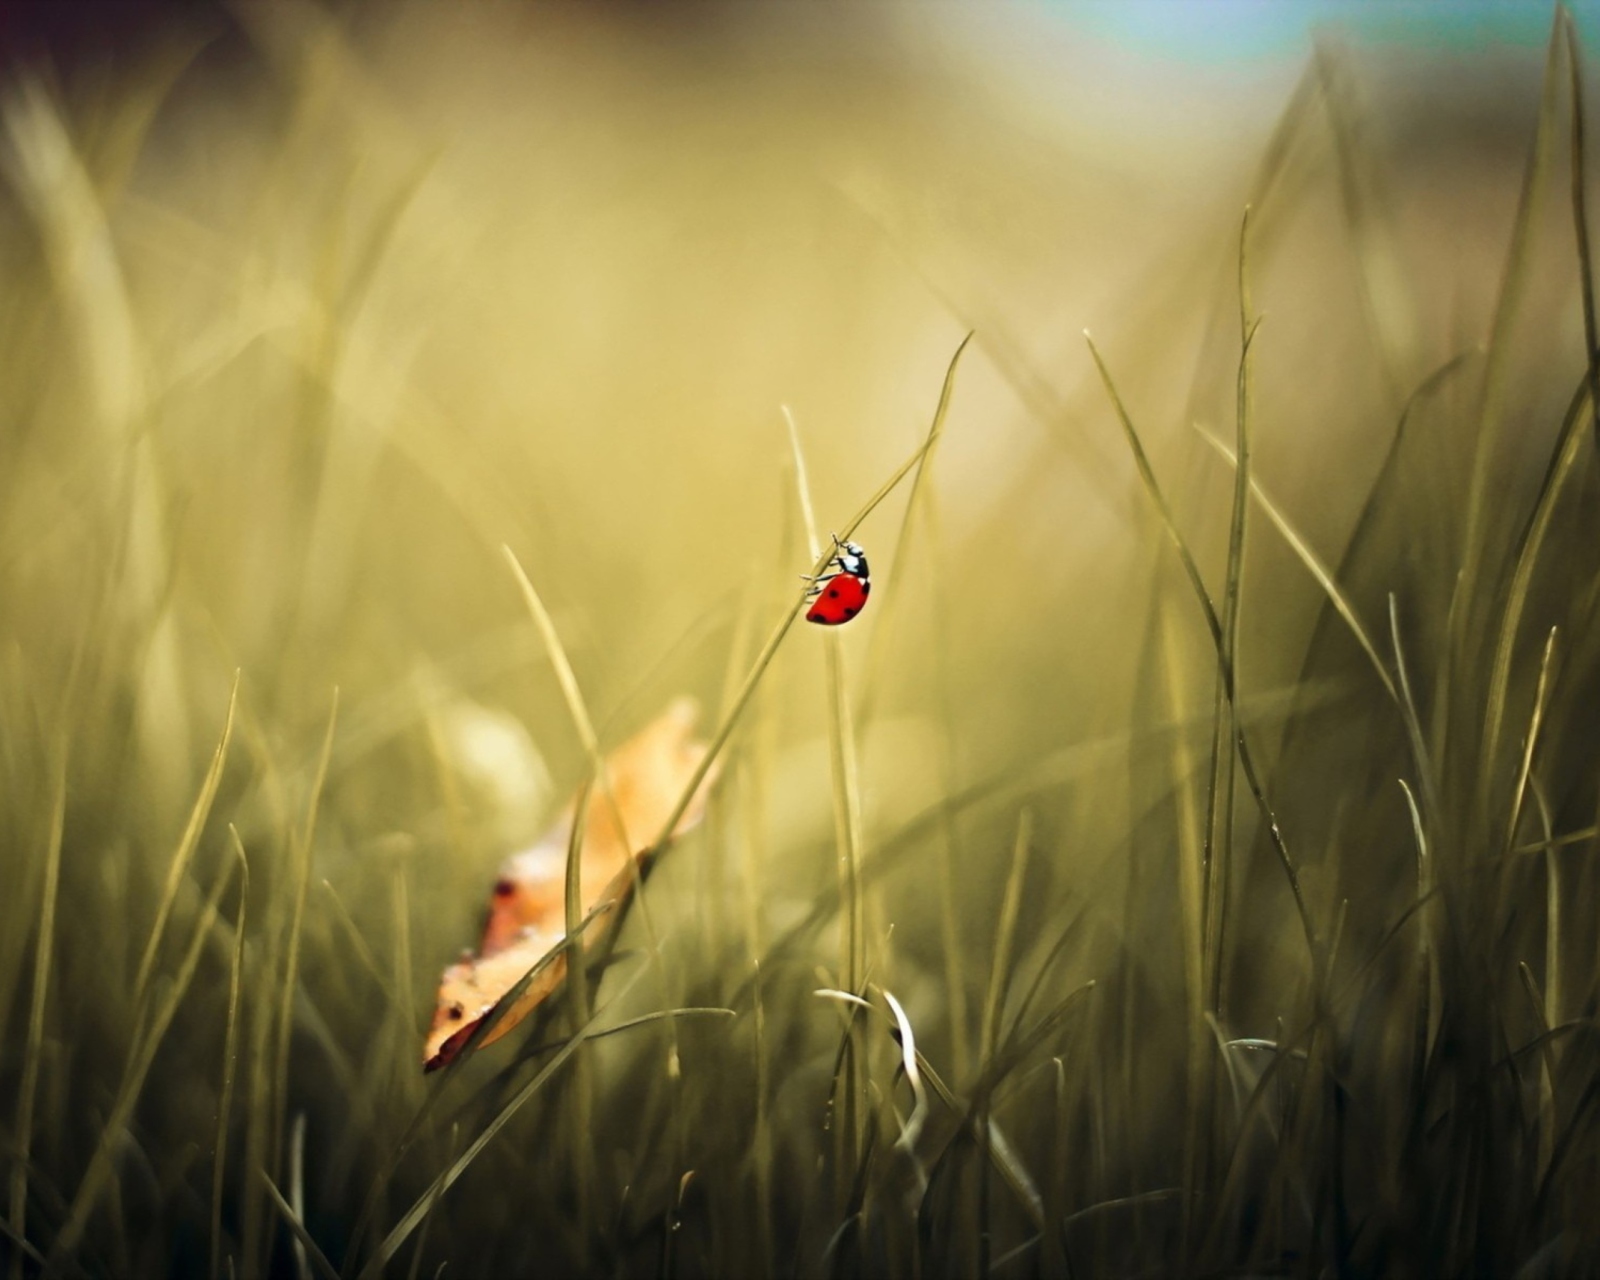 Lady Bug At Meadow wallpaper 1600x1280